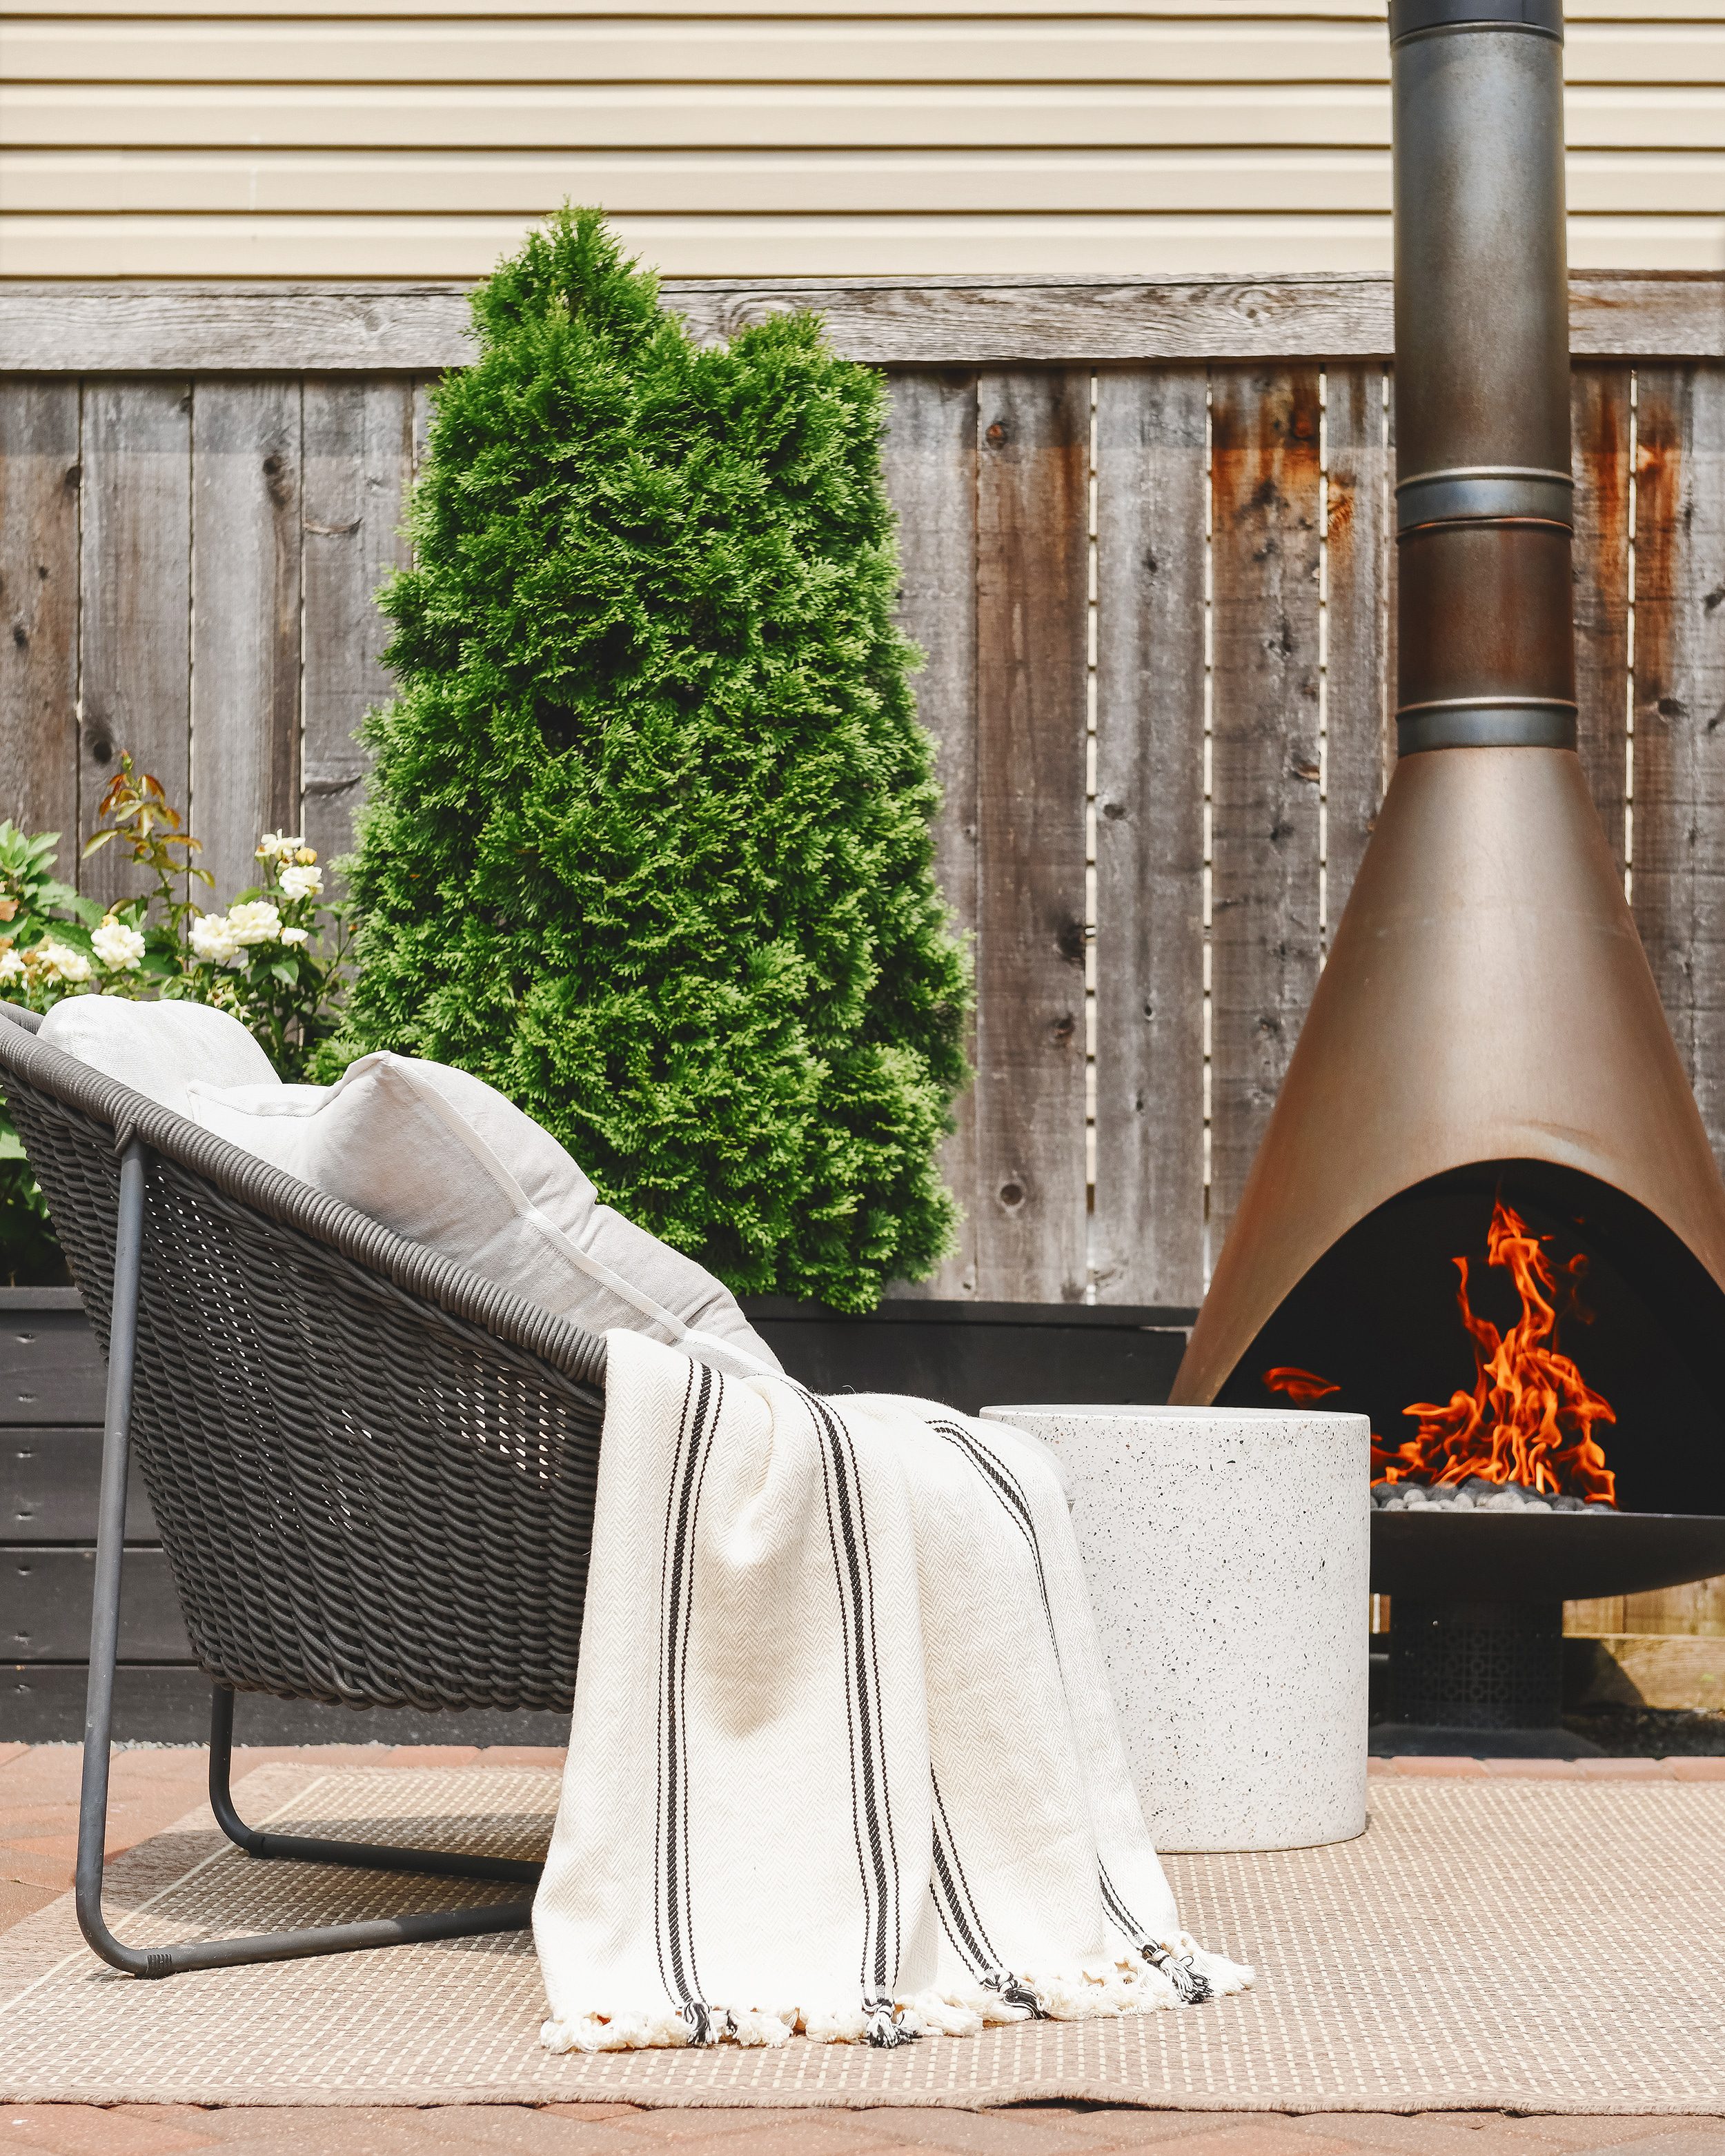 Our Chicago backyard featuring our vintage Preway fireplace, which was scored on Craigslist in Madison, WI. 